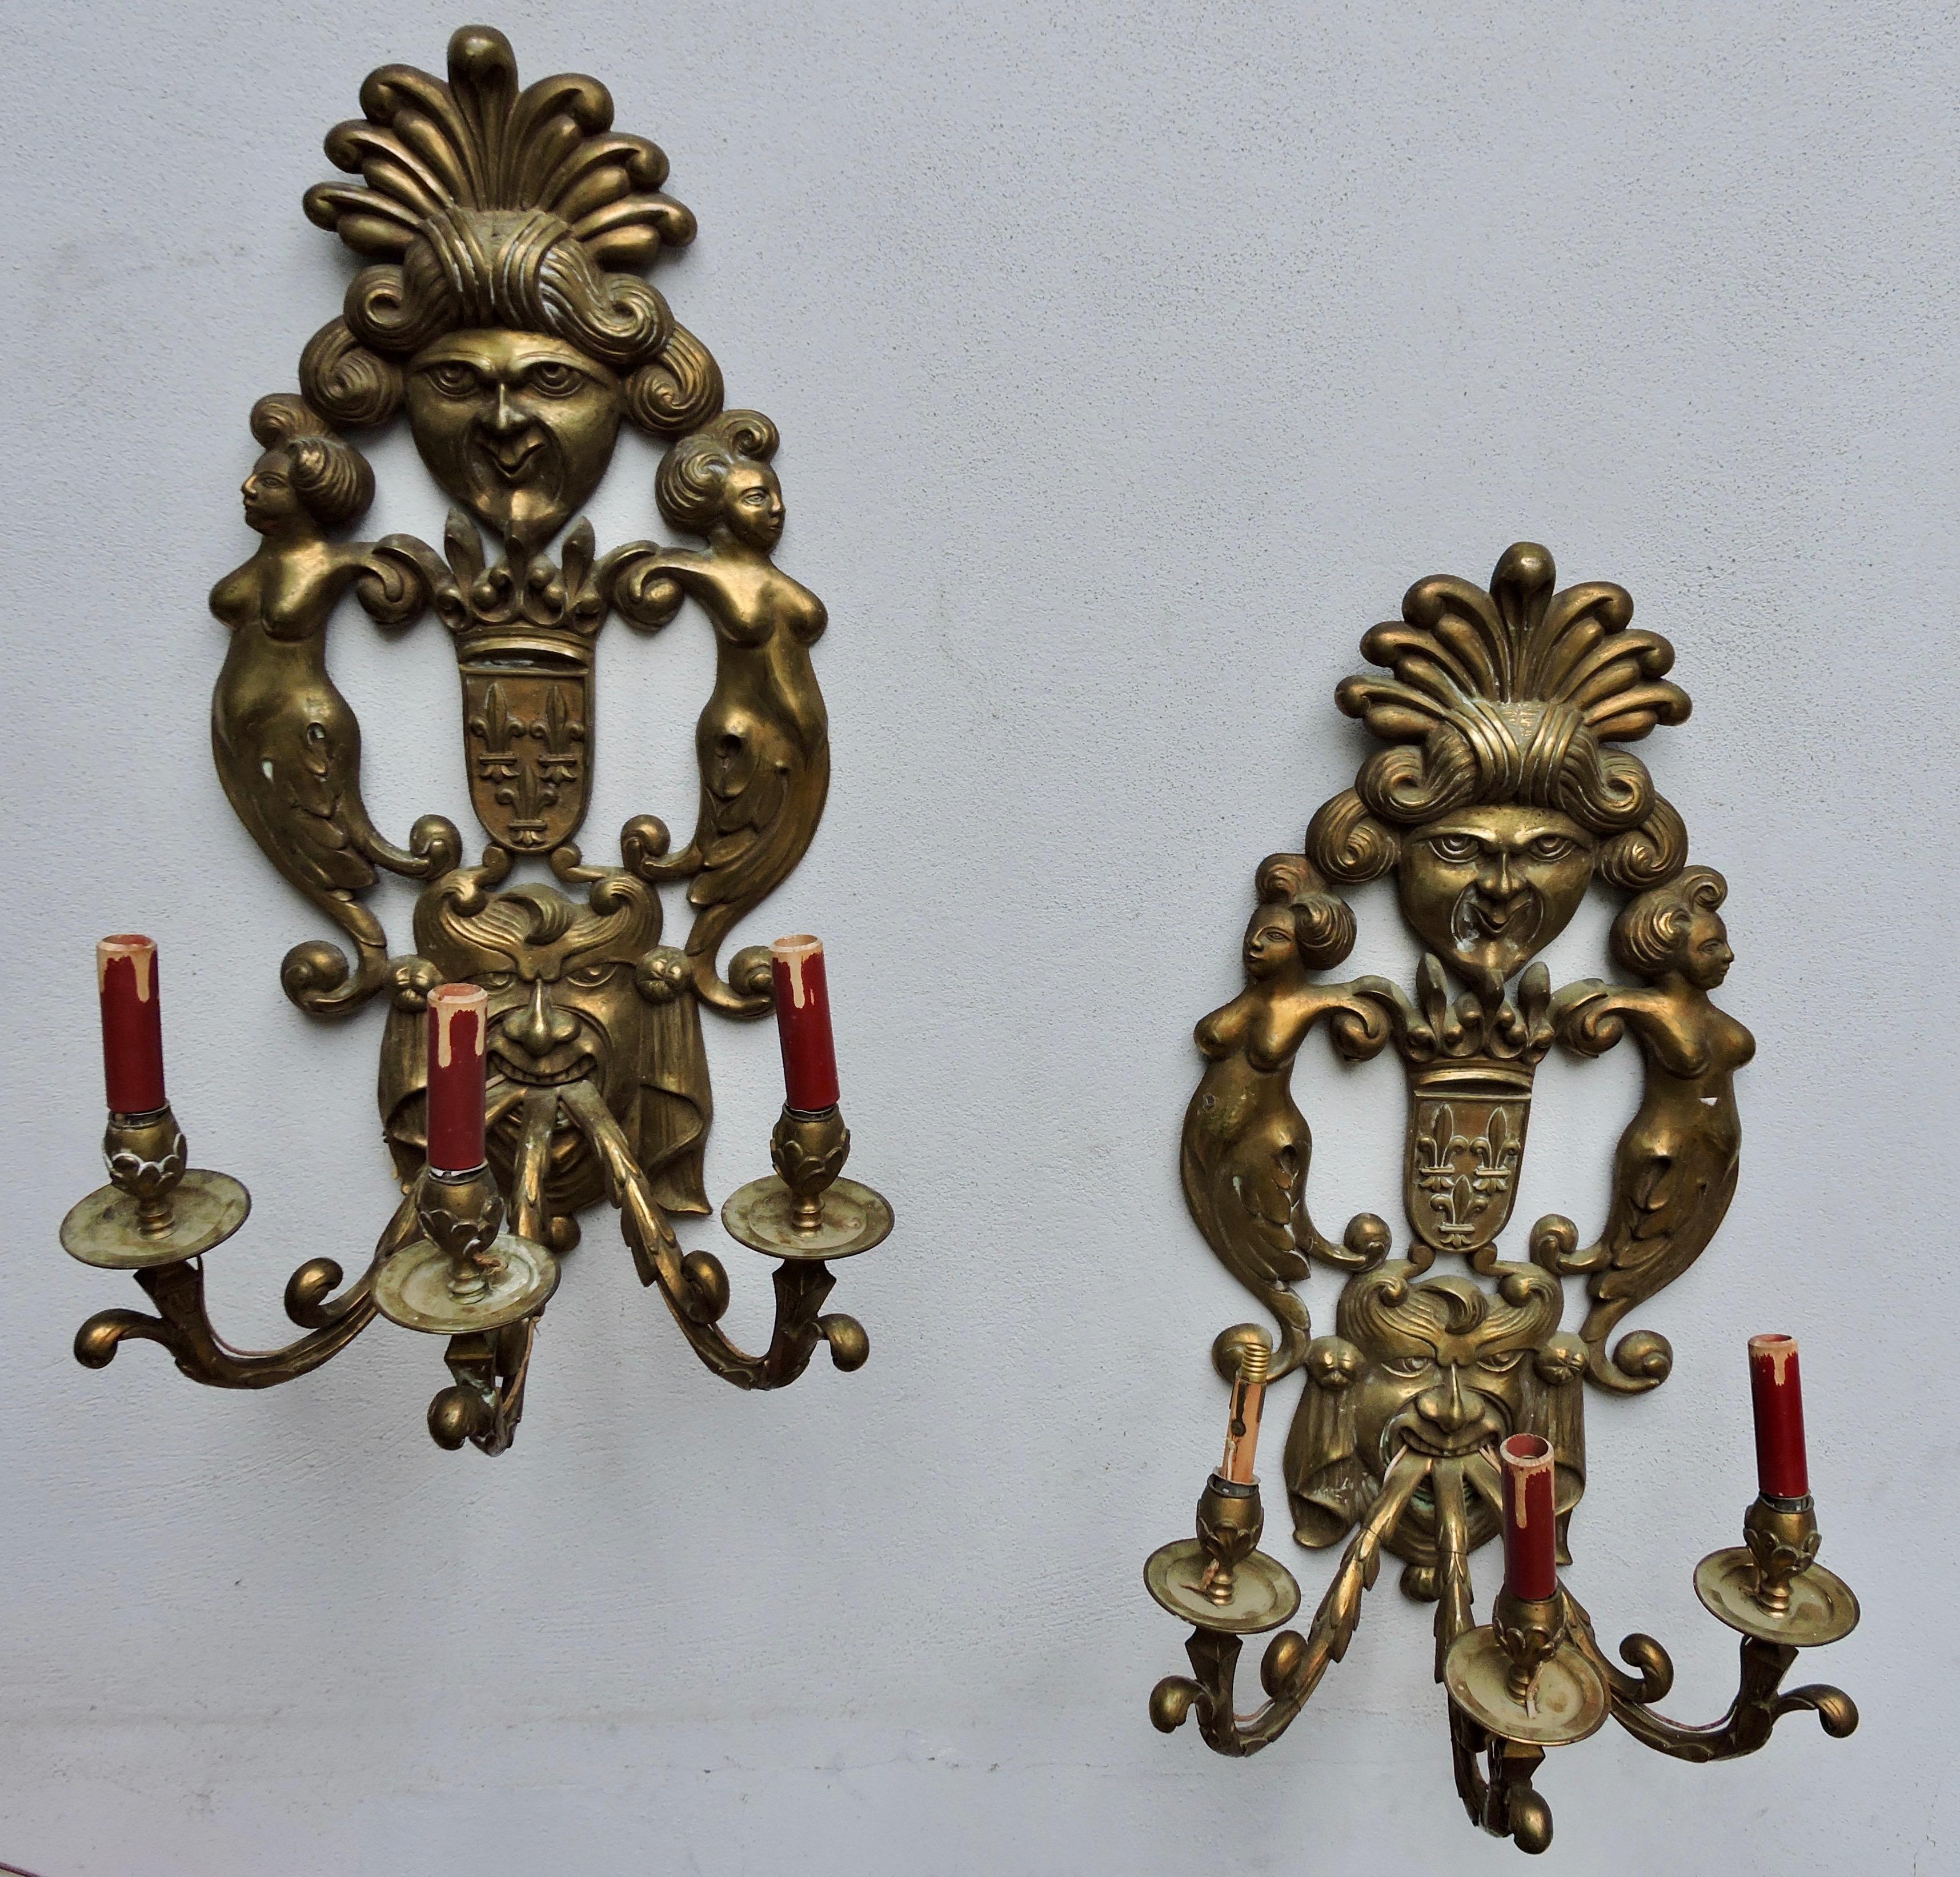 Pair of 19th century ormolu three-branch wall-lights,
Designed with Caryatids and figures from the Comedia del Arte.
Bearing the French Fleur de Lys Armories,
circa 1890.